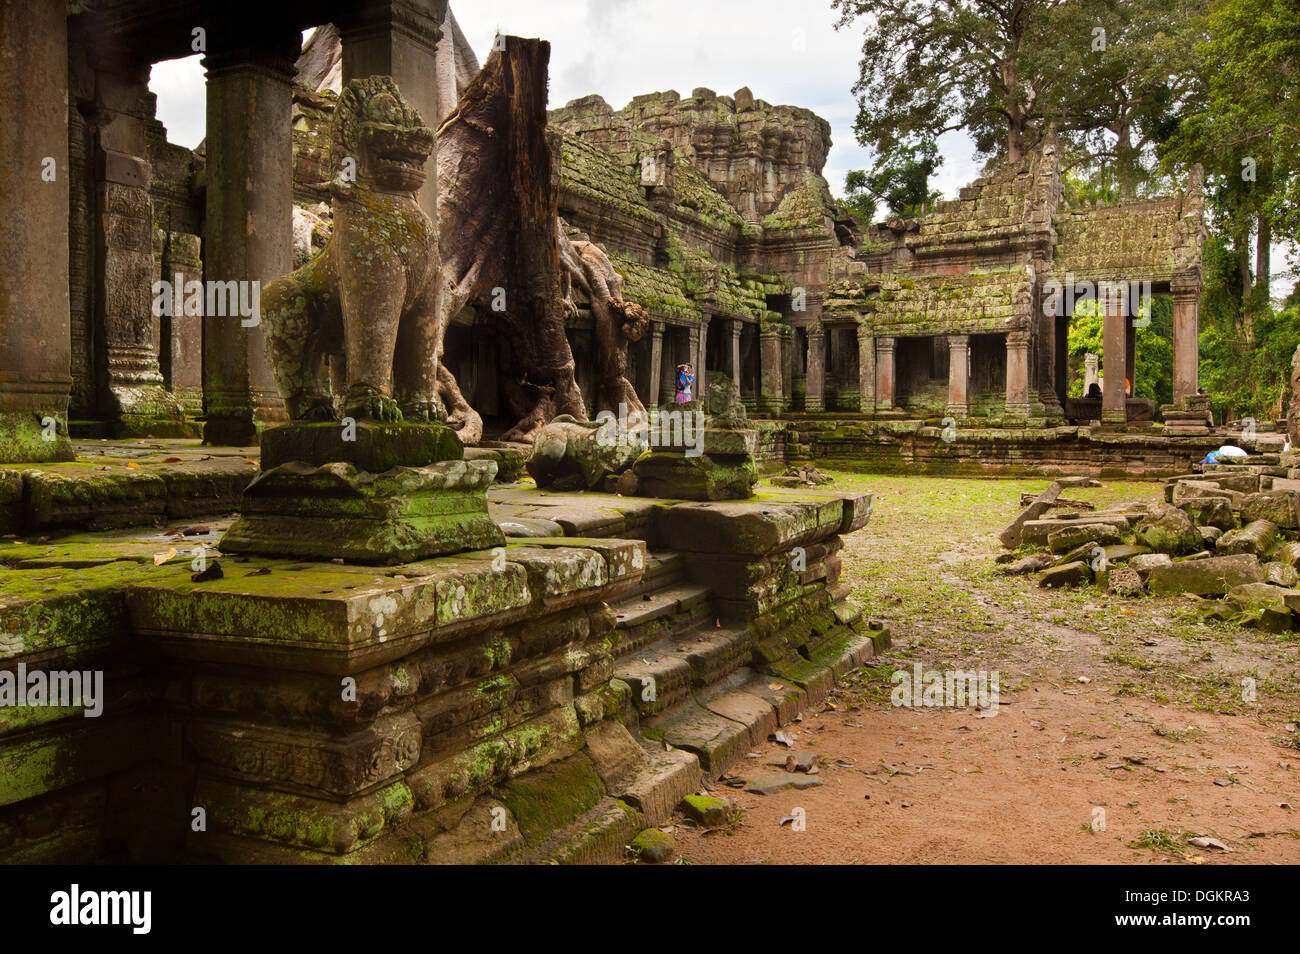 Ruins of Preah Khan which is also known as Sacred Sword. Stock Photo